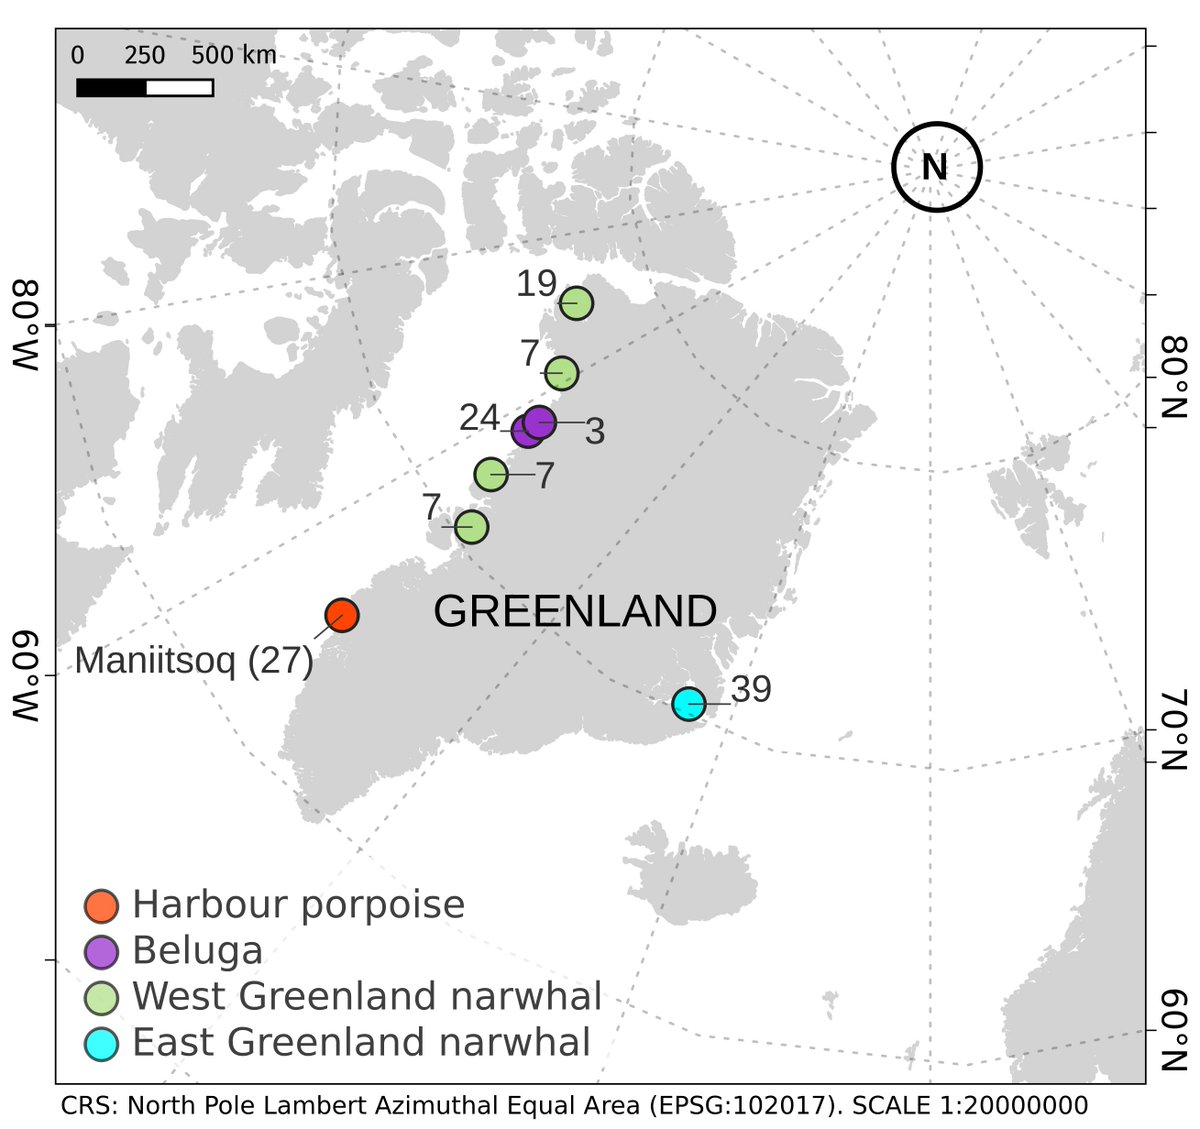 Happy to share our new stable isotope paper: “Sex and size matter: foraging ecology of offshore harbour porpoises in waters around Greenland” link.springer.com/article/10.100…